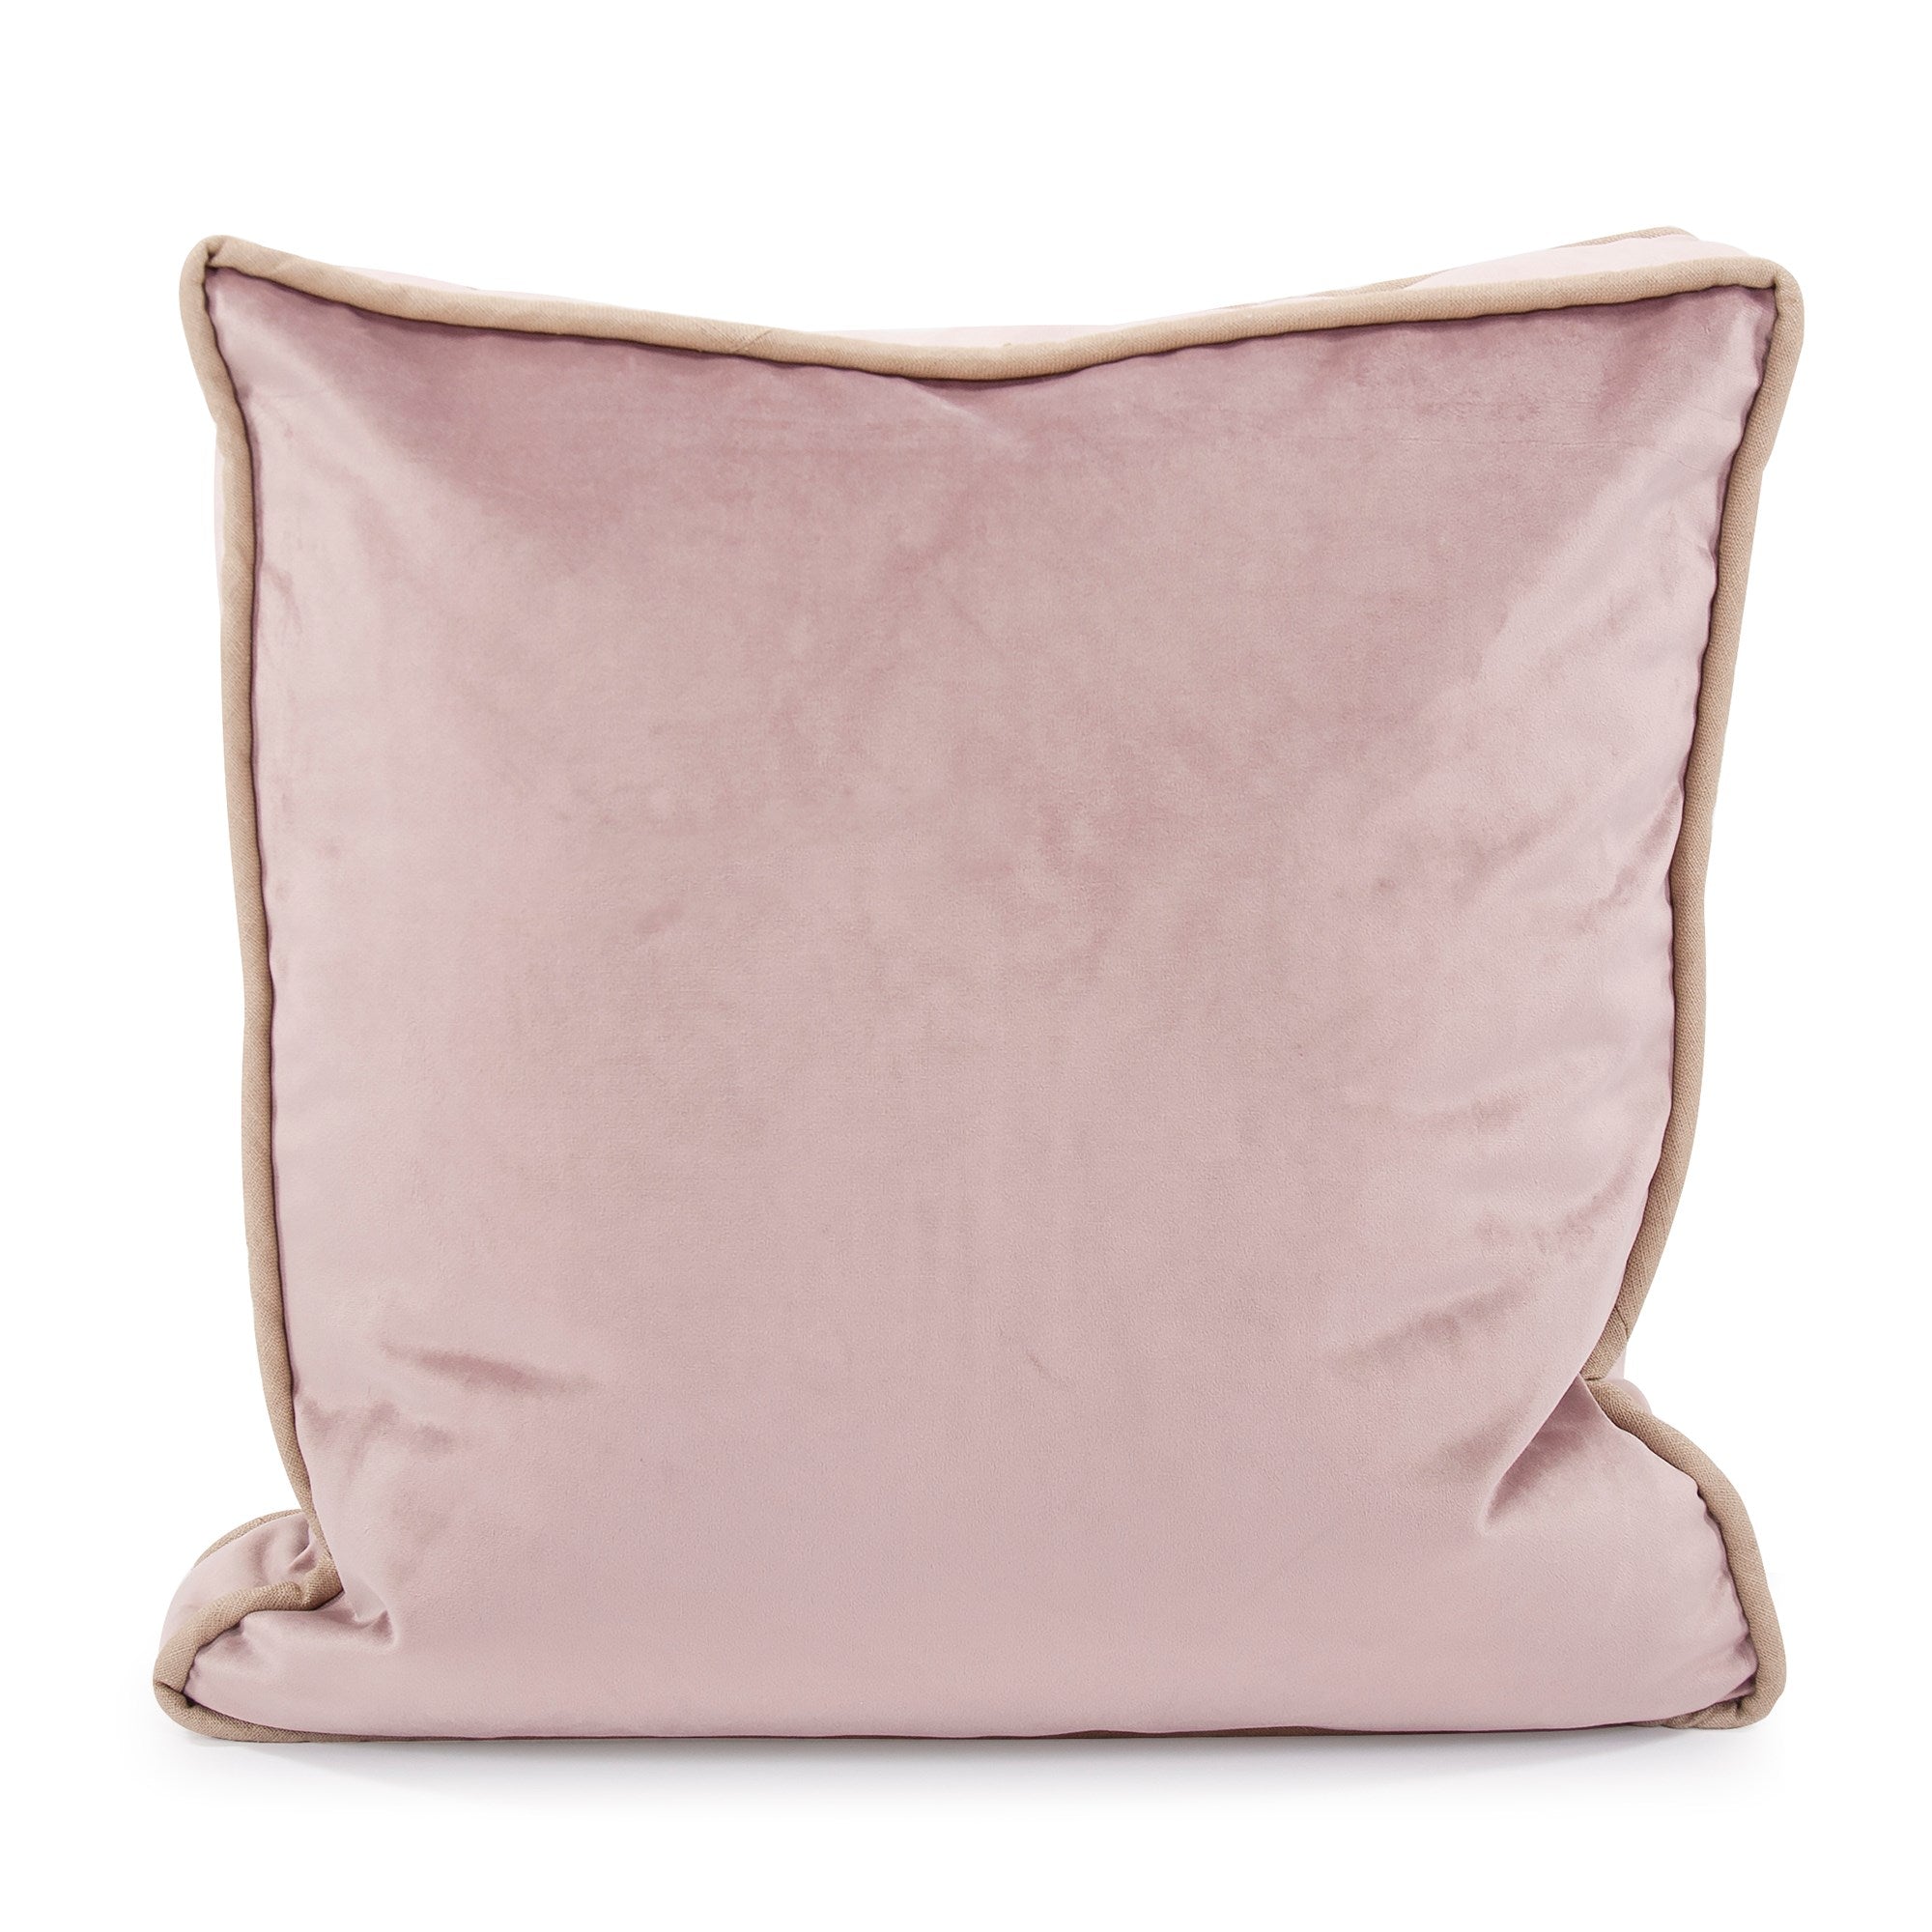 Gusseted Bella Rose Down Pillow- 20" x 20"